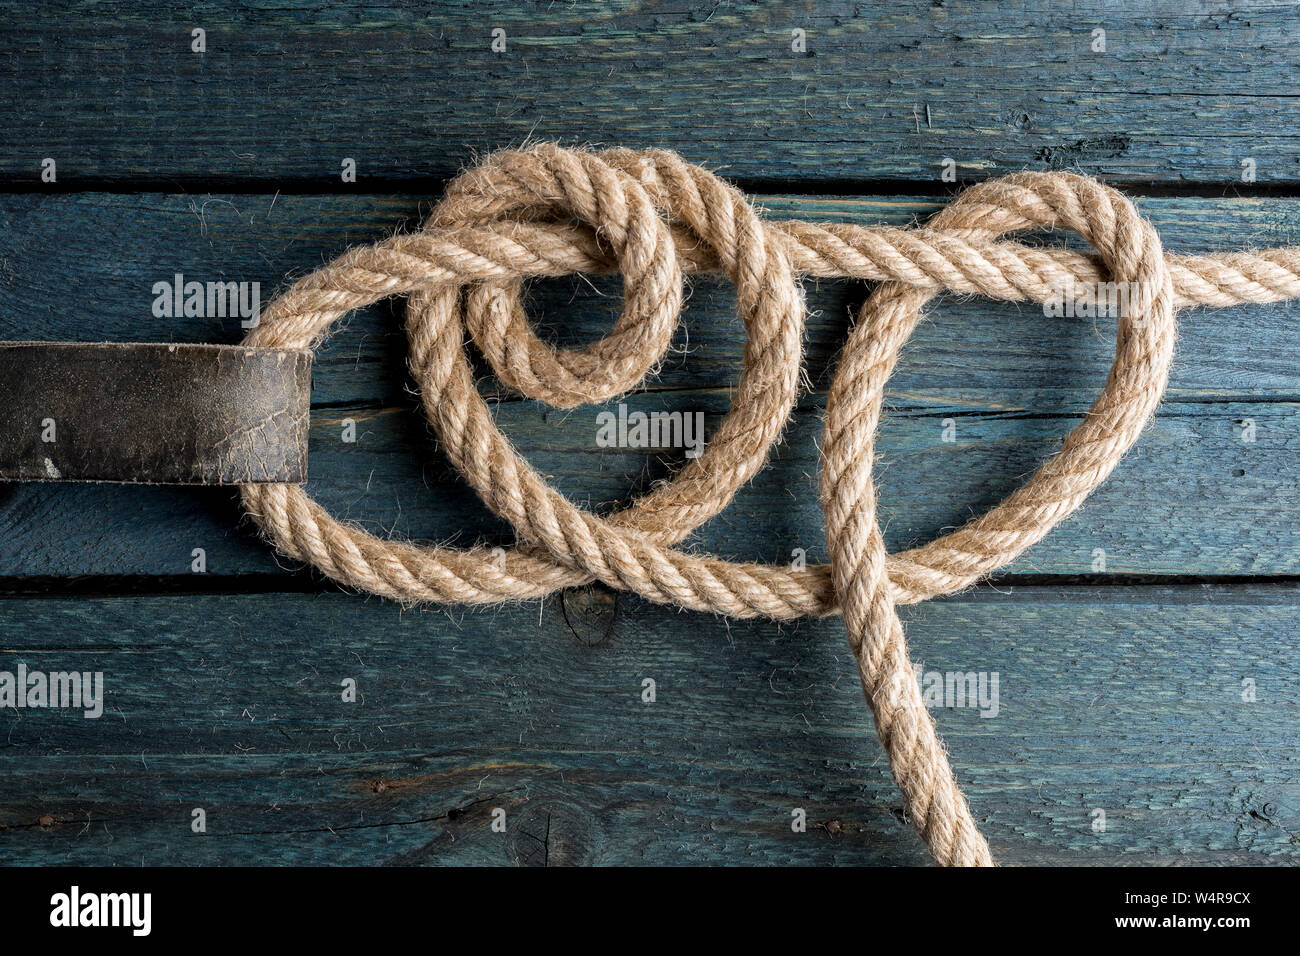 A Tow Rope with Hooks on a Light Background. Stock Photo - Image of knot,  durable: 99848794